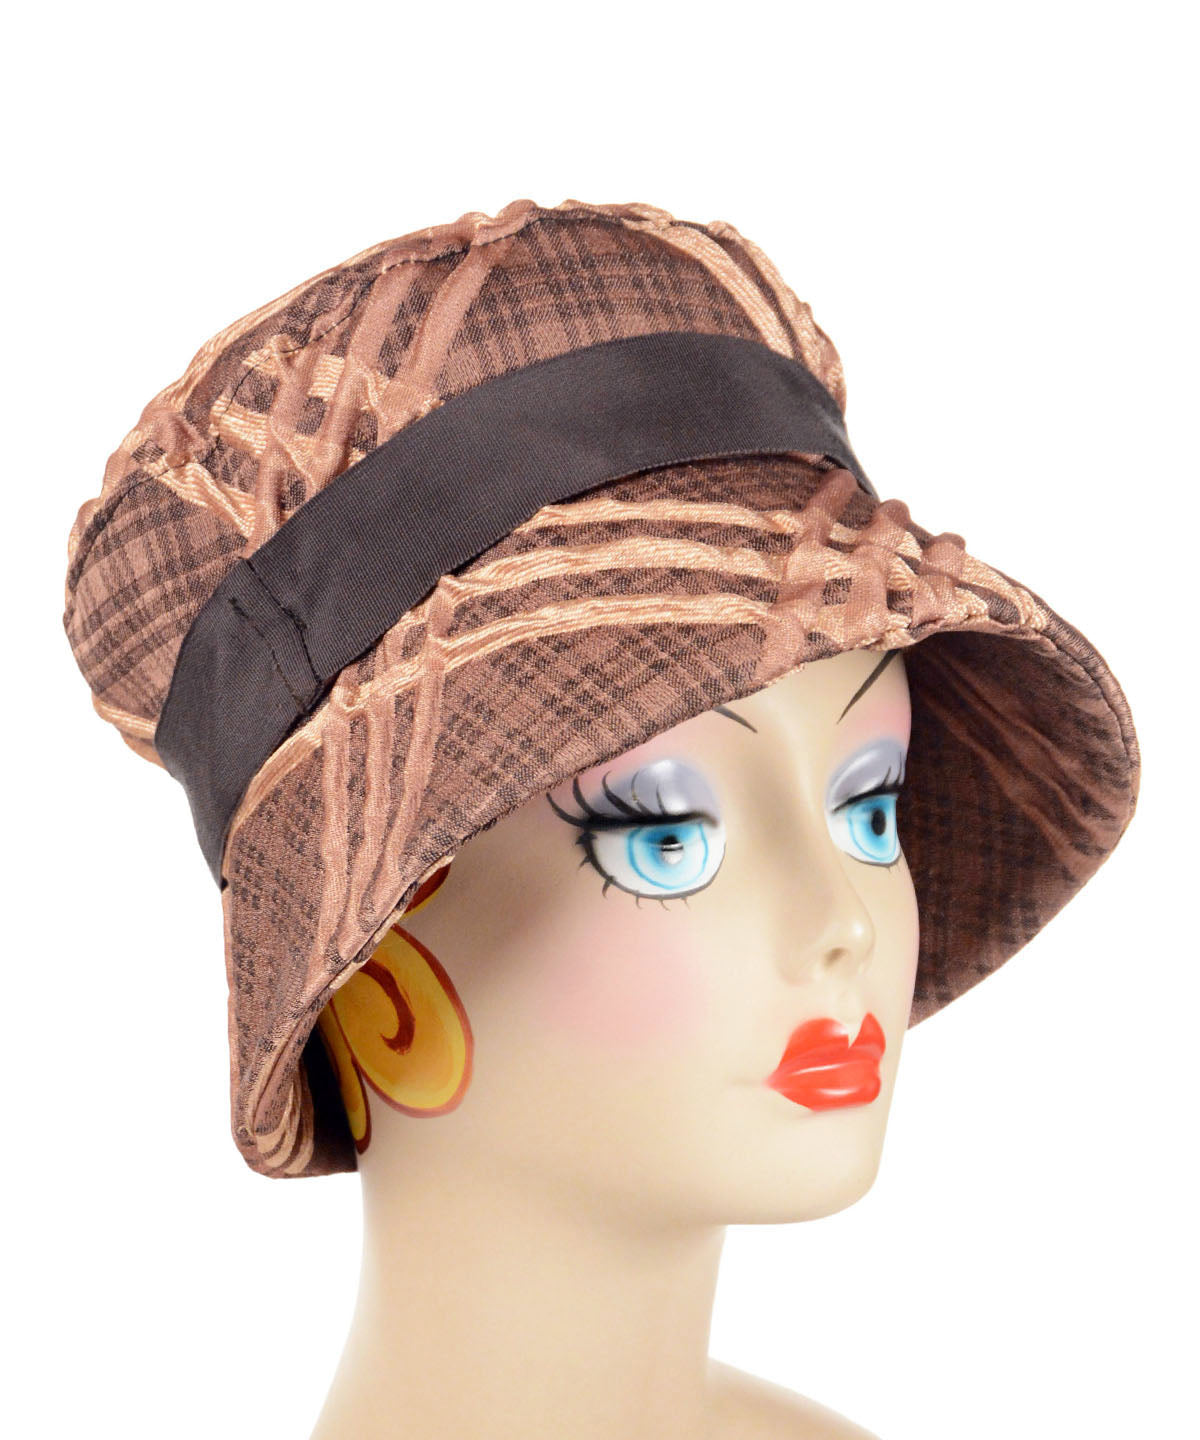 Molly hat in Copper Plaid with Chocolate Grosgrain Band By Pandemonium Seattle. Handmade in America.